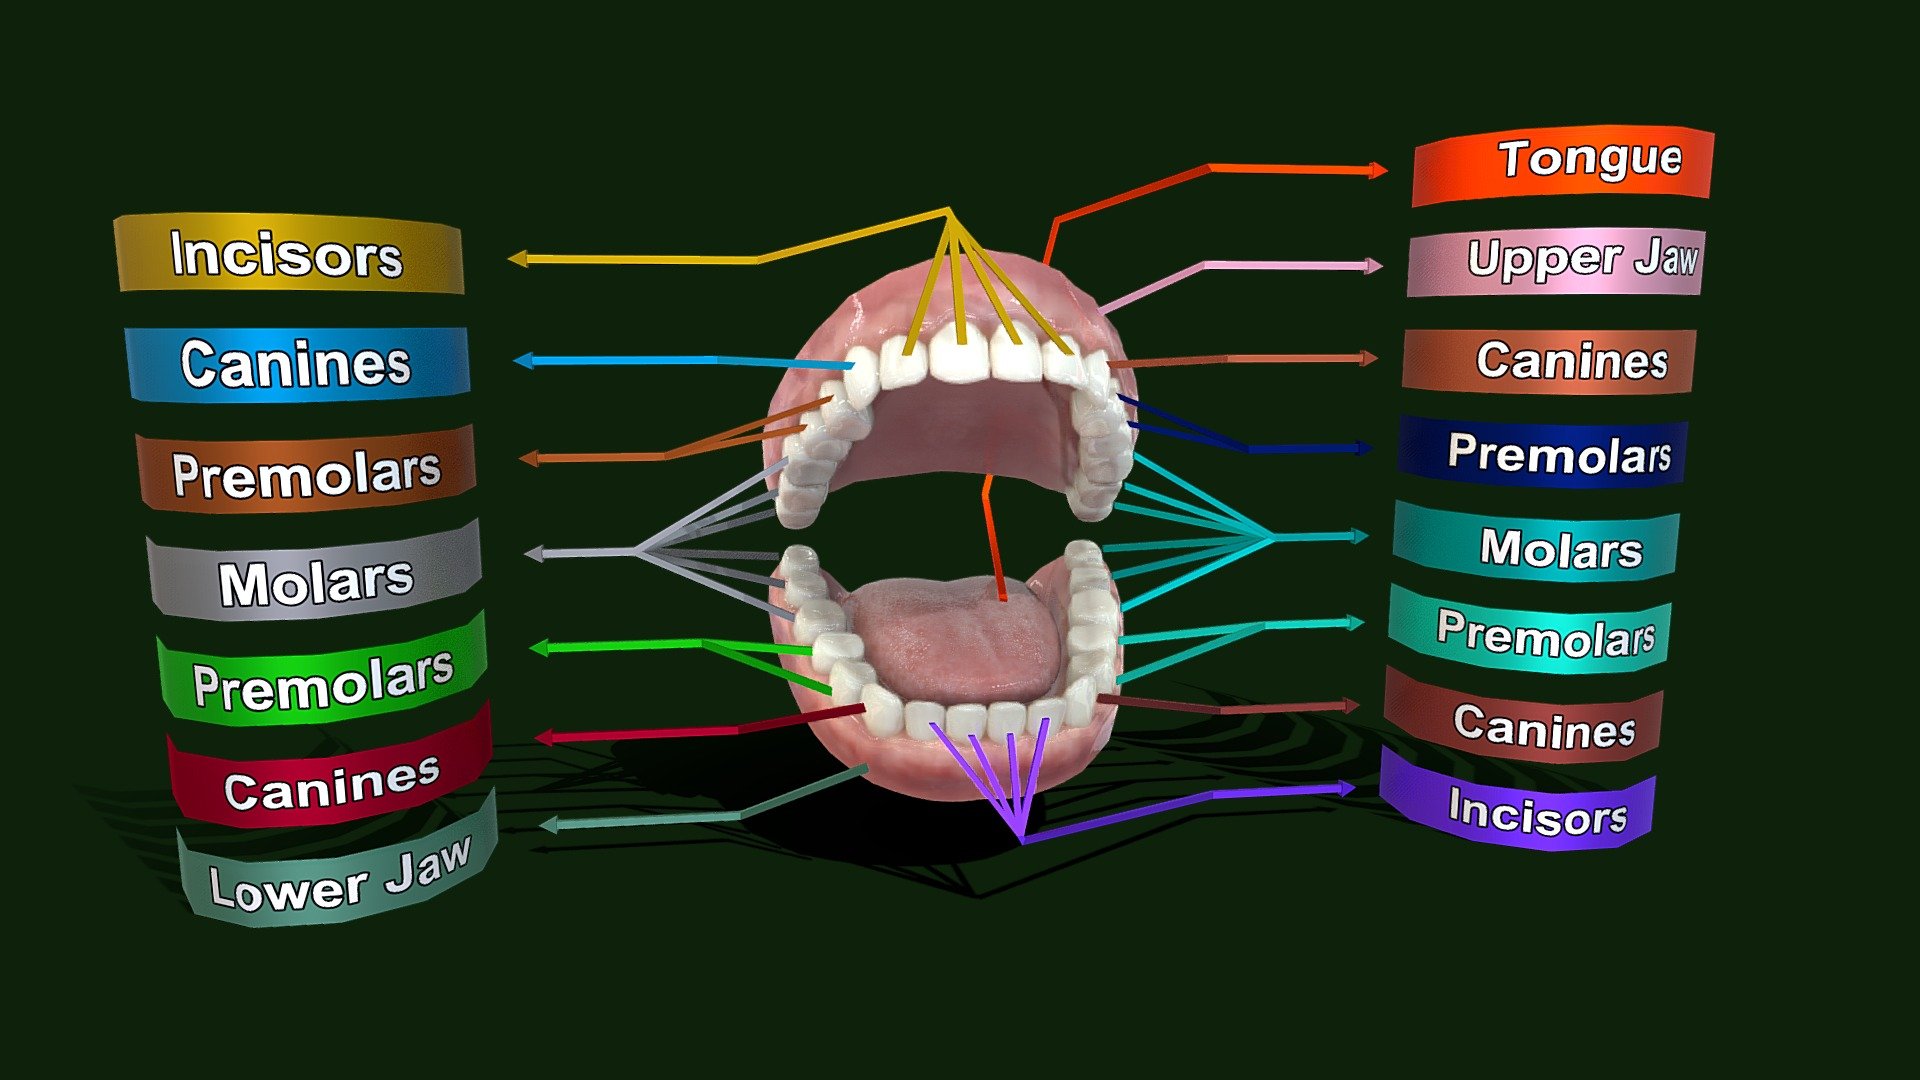 Teeth anatomy - Human teeth structure
Realistic human teeth for Education purpose. Teeth anatomy with labels. 
This is low poly model for Games, apps, AR, VR, MR and XR, ready to use in game.
Textures: 2048x2048 - Teeth anatomy - Human teeth structure - Buy Royalty Free 3D model by srikanthsamba 3d model